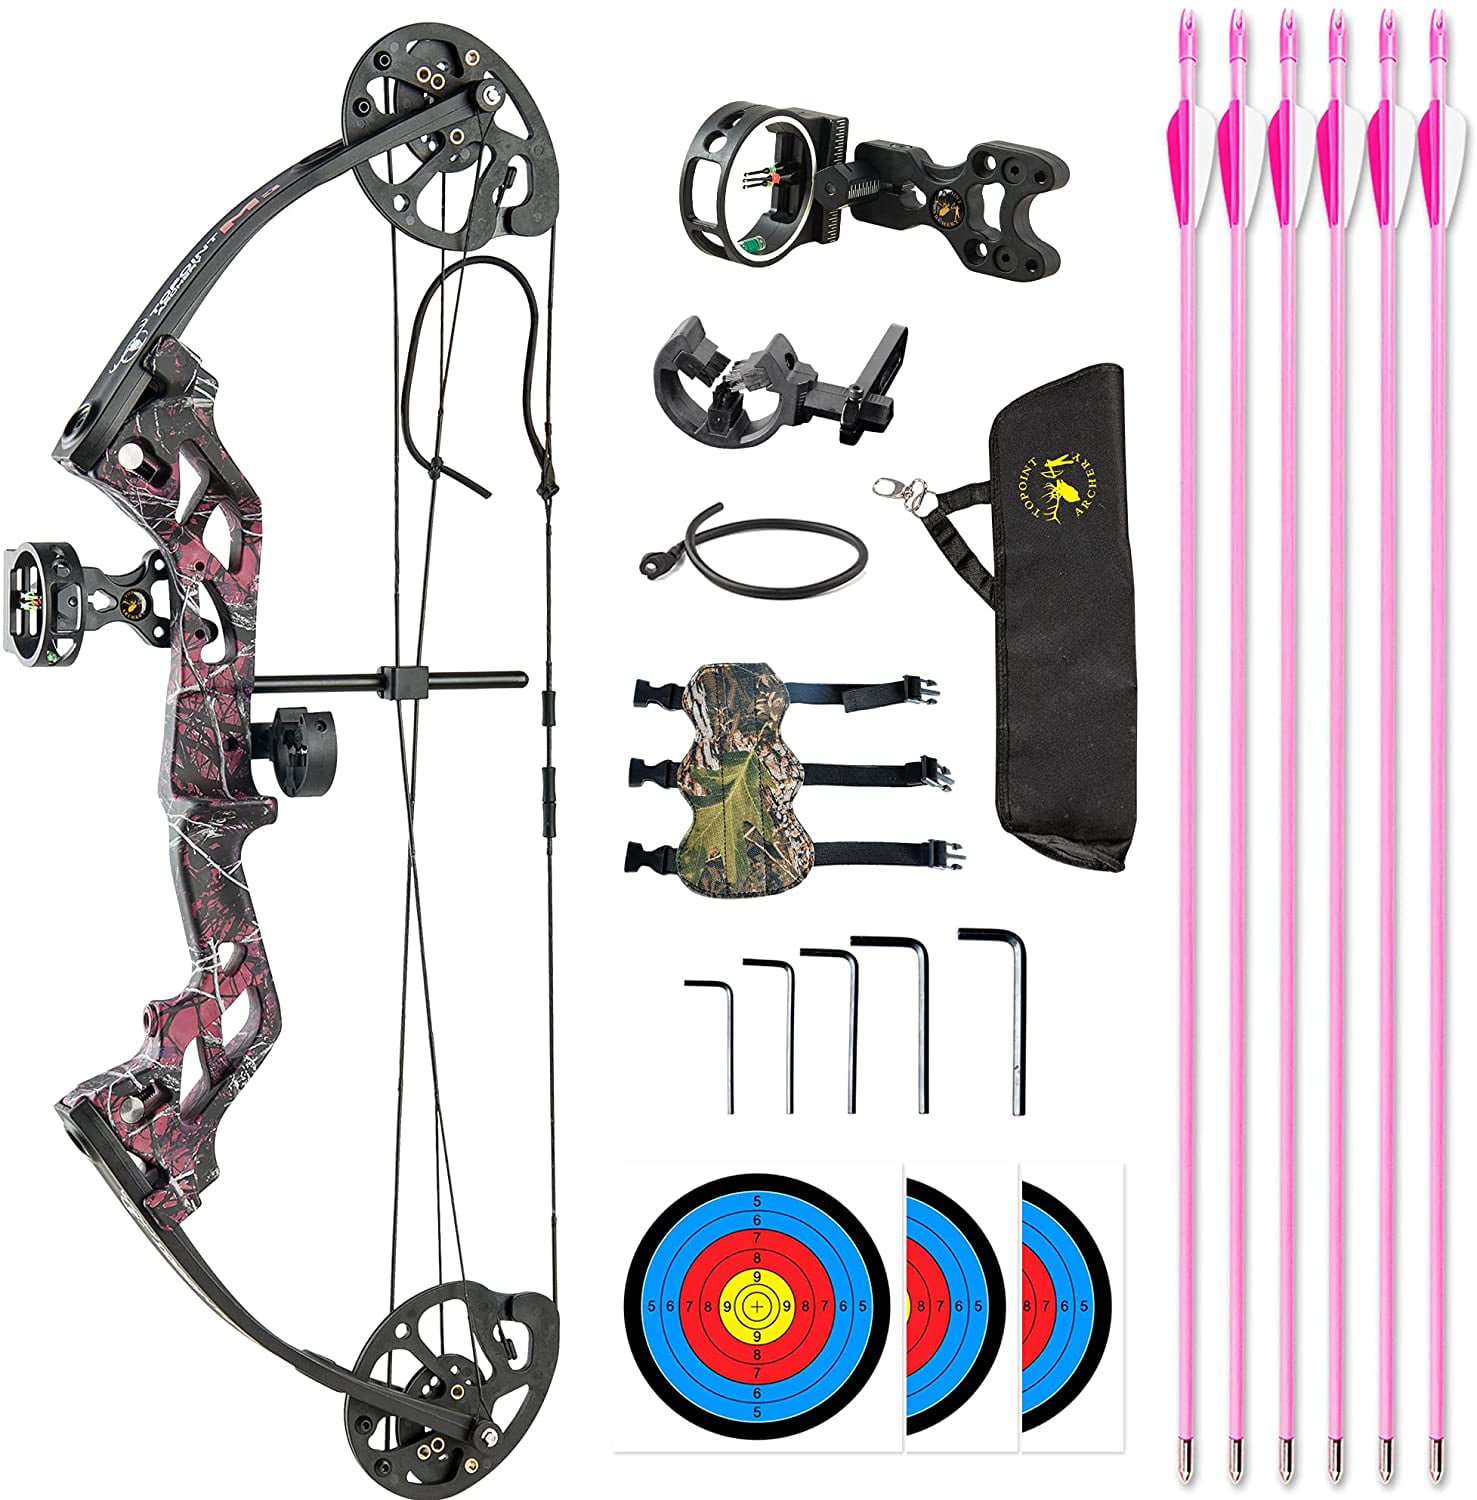 Takedown Recurve Bow Set 32LBS Archery Bow Arrow Adults Youth Shooting Practice 